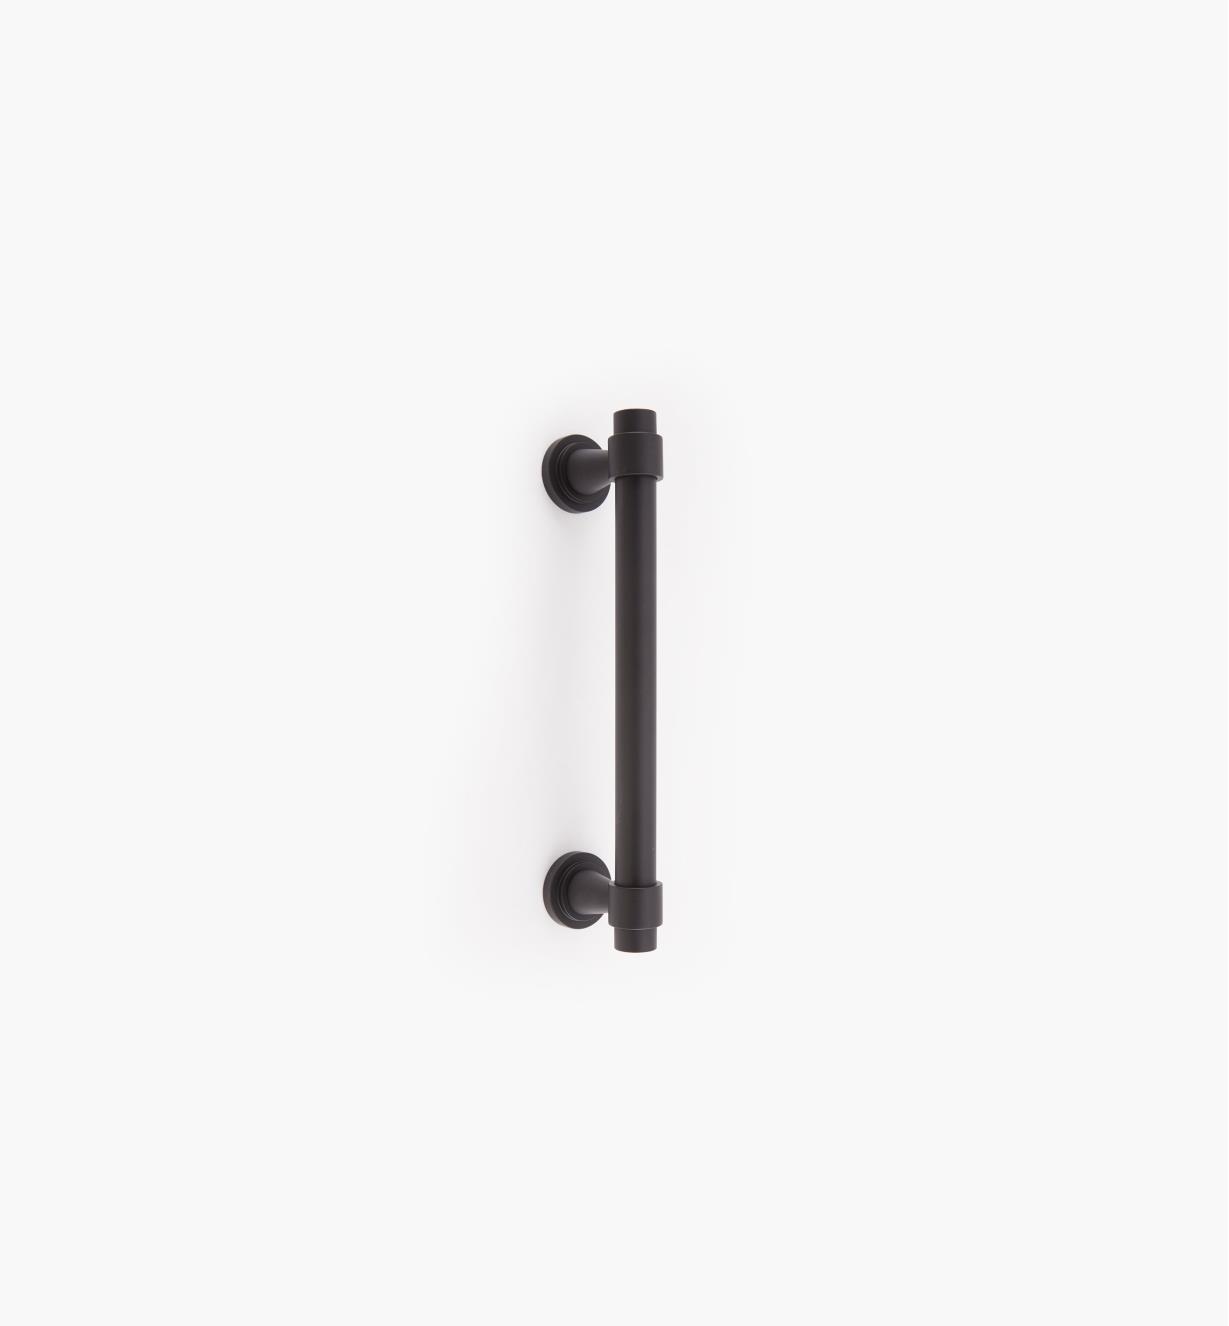 00W0717 - Concerto Appliance Handles - 8" (203mm) Oil-Rubbed Bronze Handle